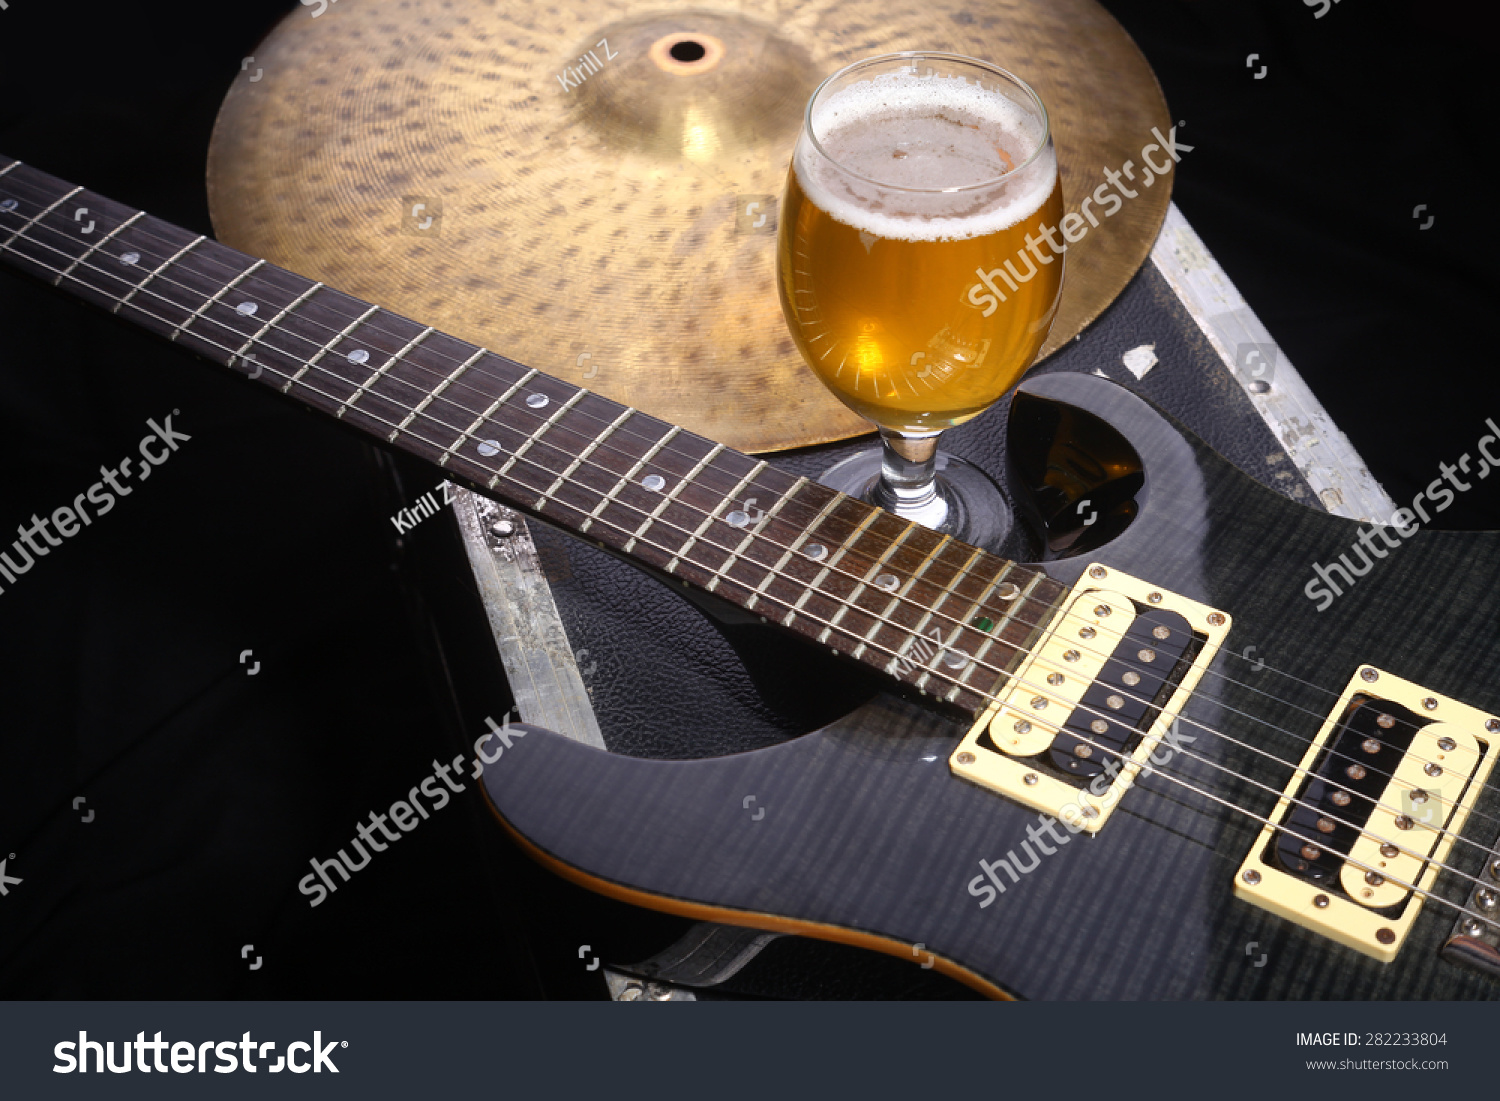 Glass full of light beer standing on a case with some music equipment #282233804